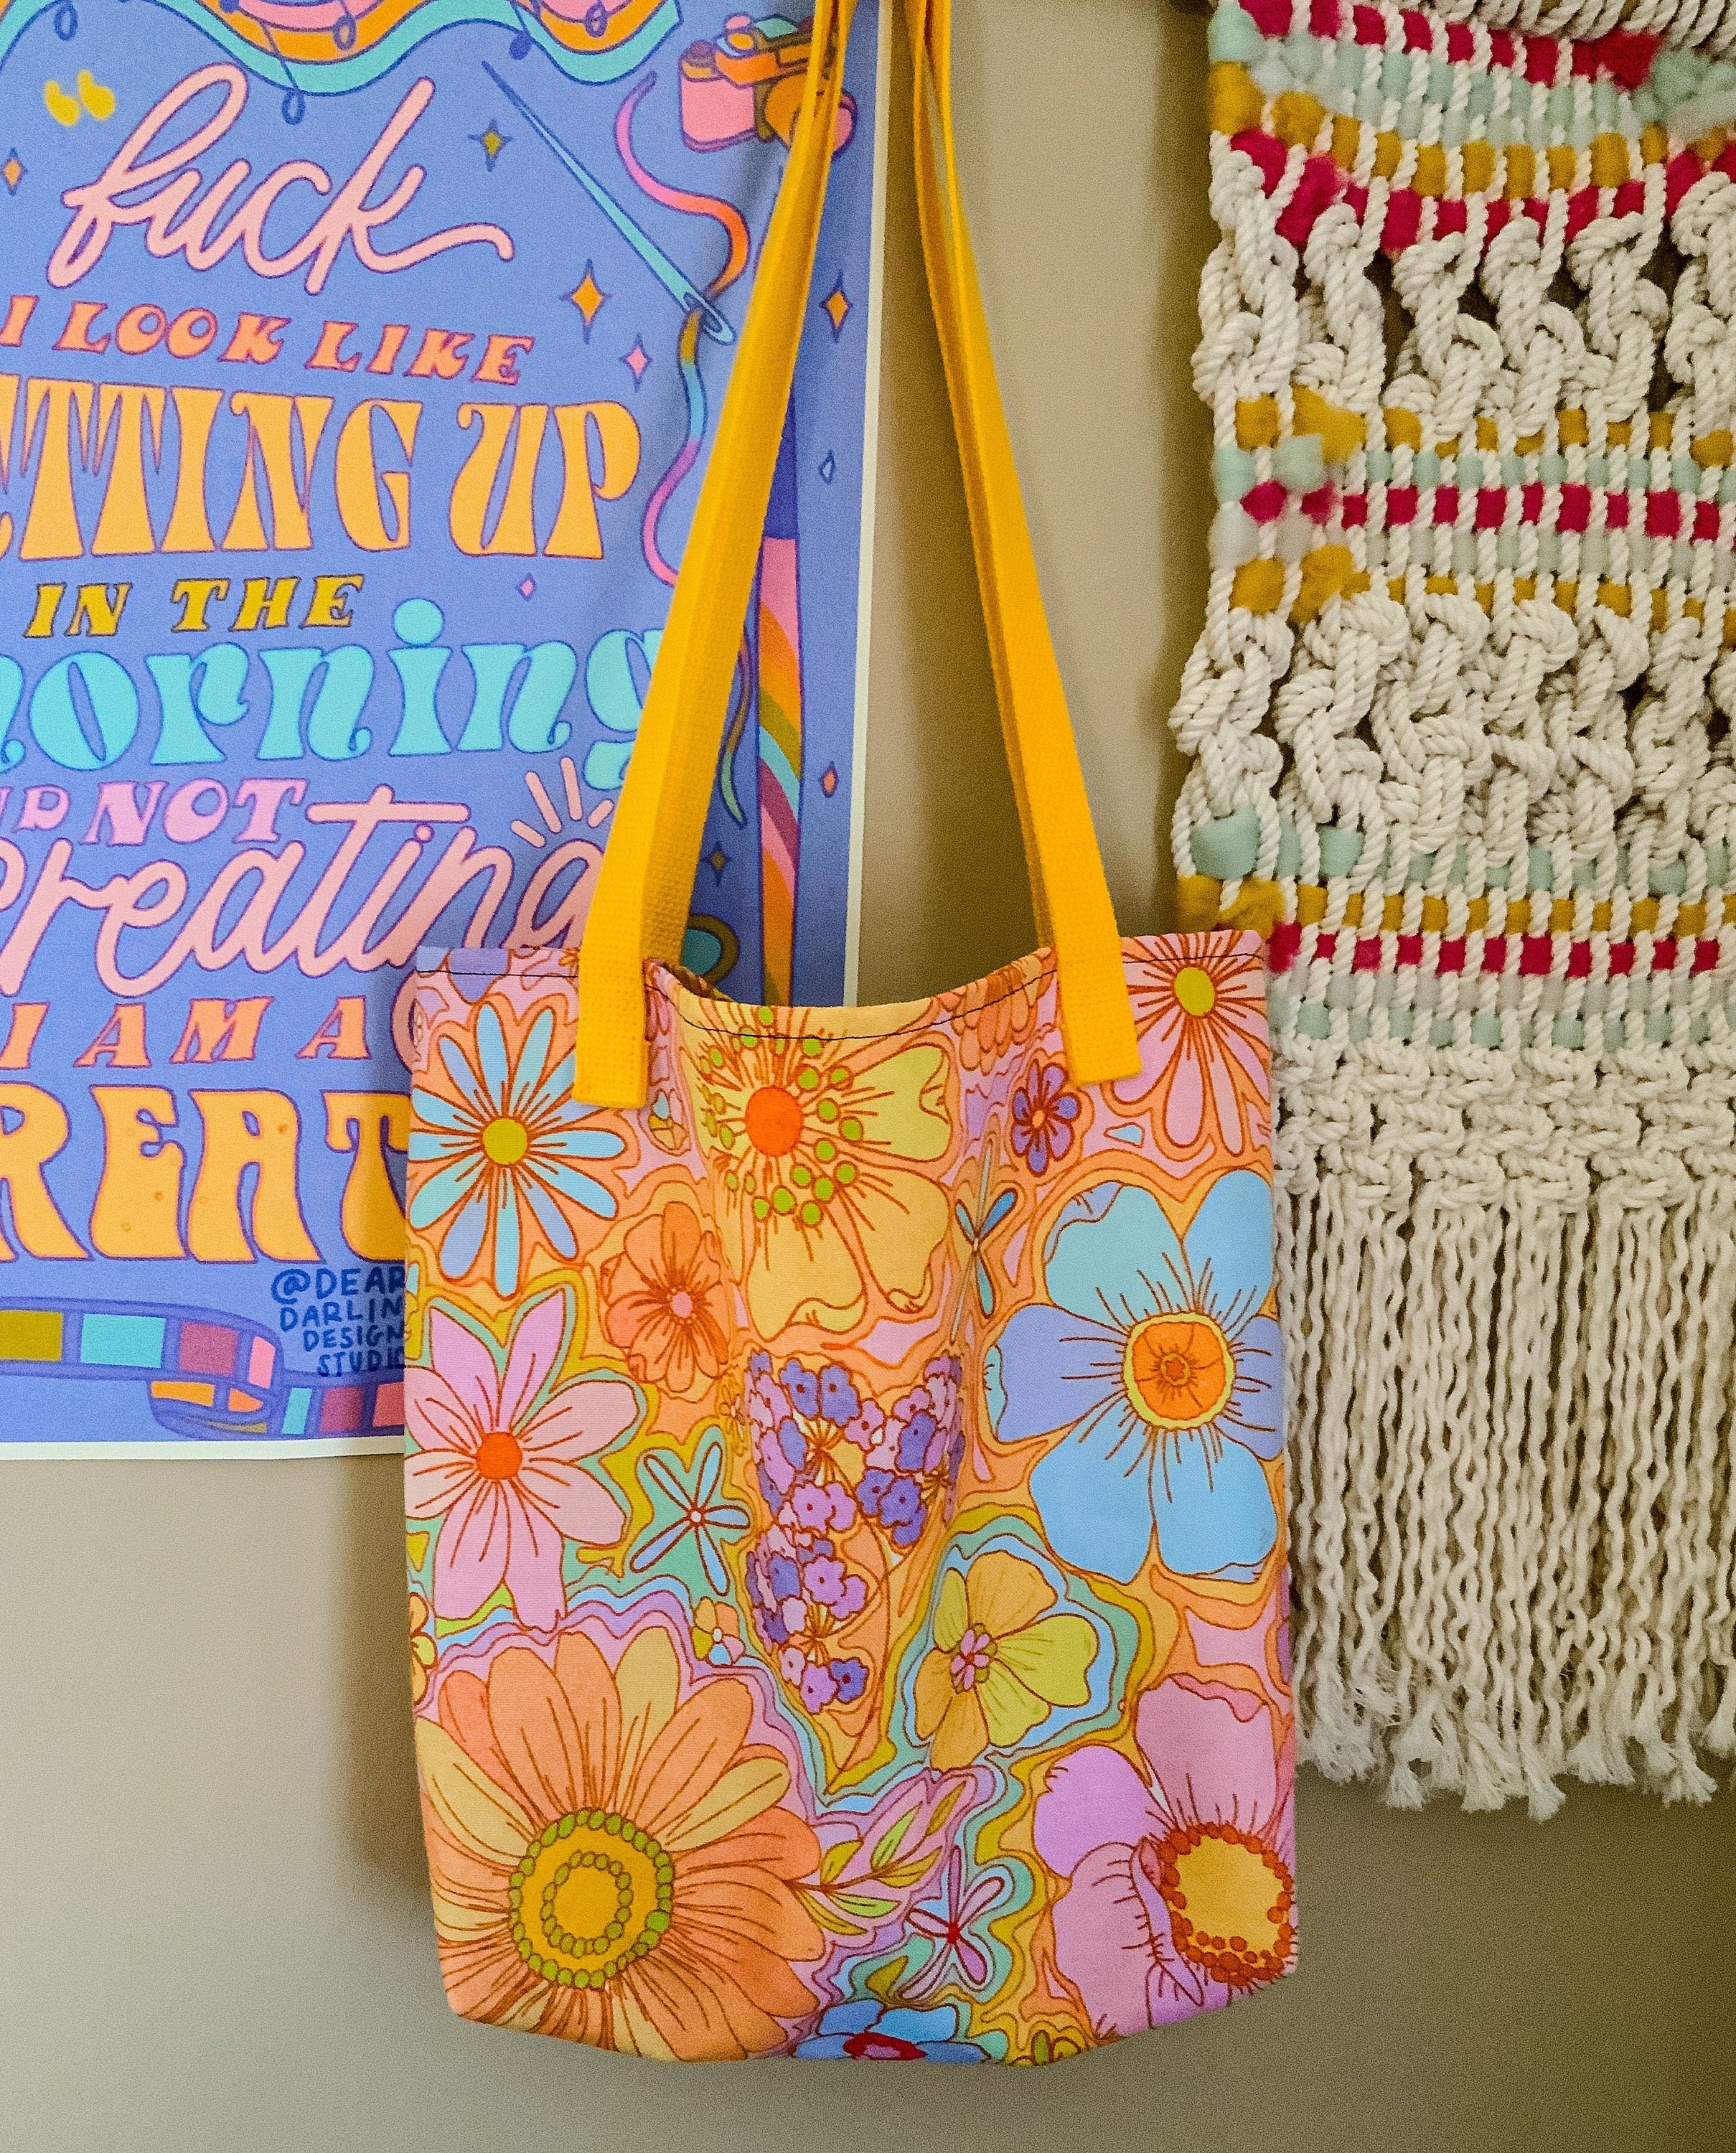 70s fashion: flowers, disco music and style - JNH Bags